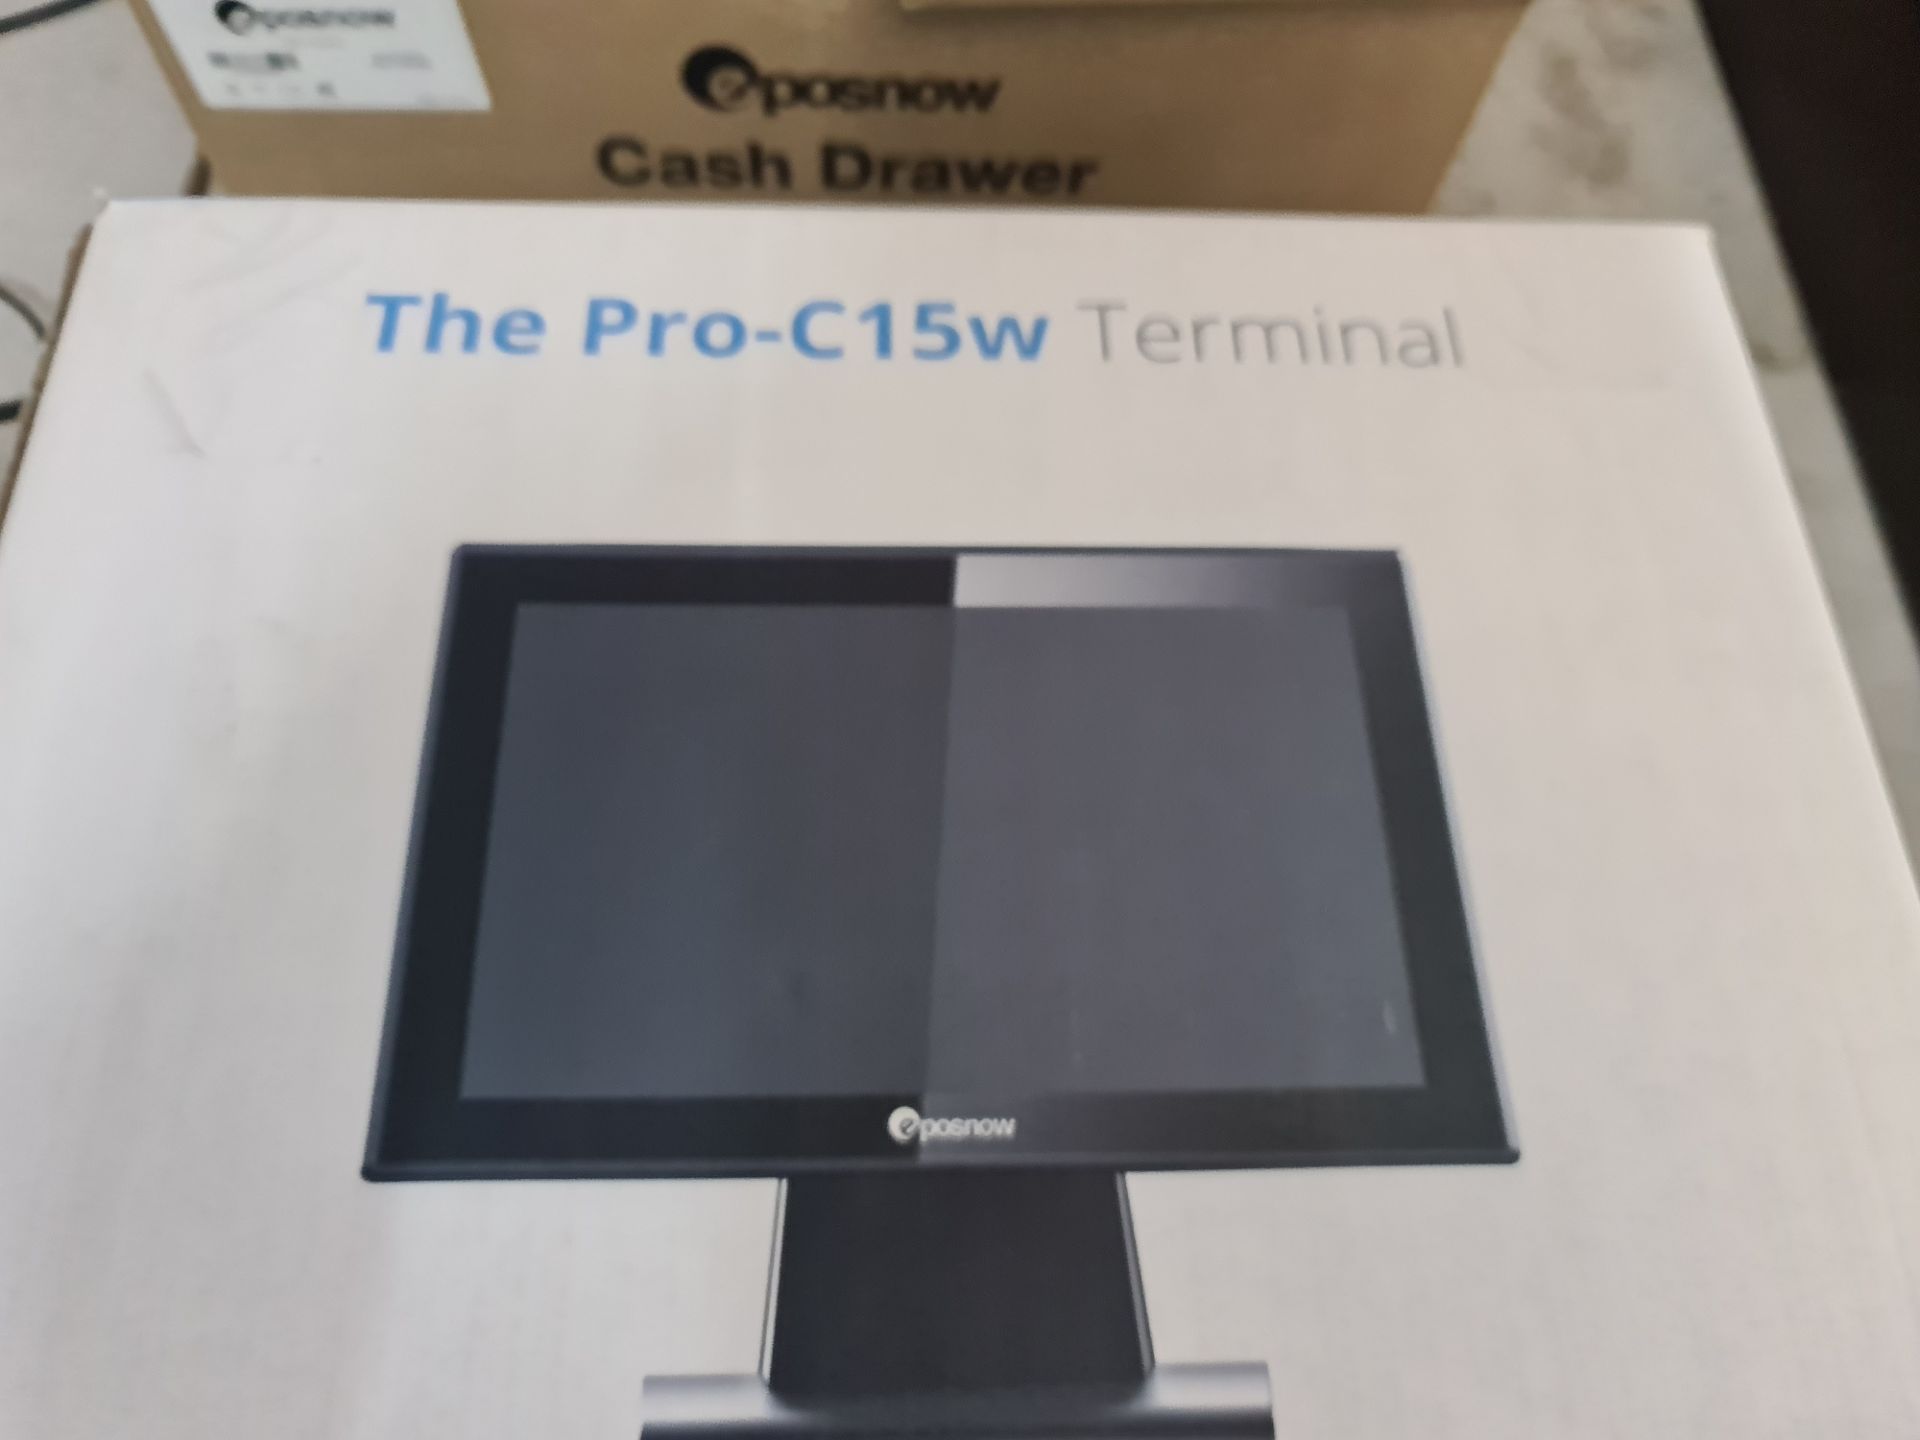 Eposnow model Pro-C15W EPOS terminal - includes box but we are uncertain if this item is new/unused - Image 2 of 4